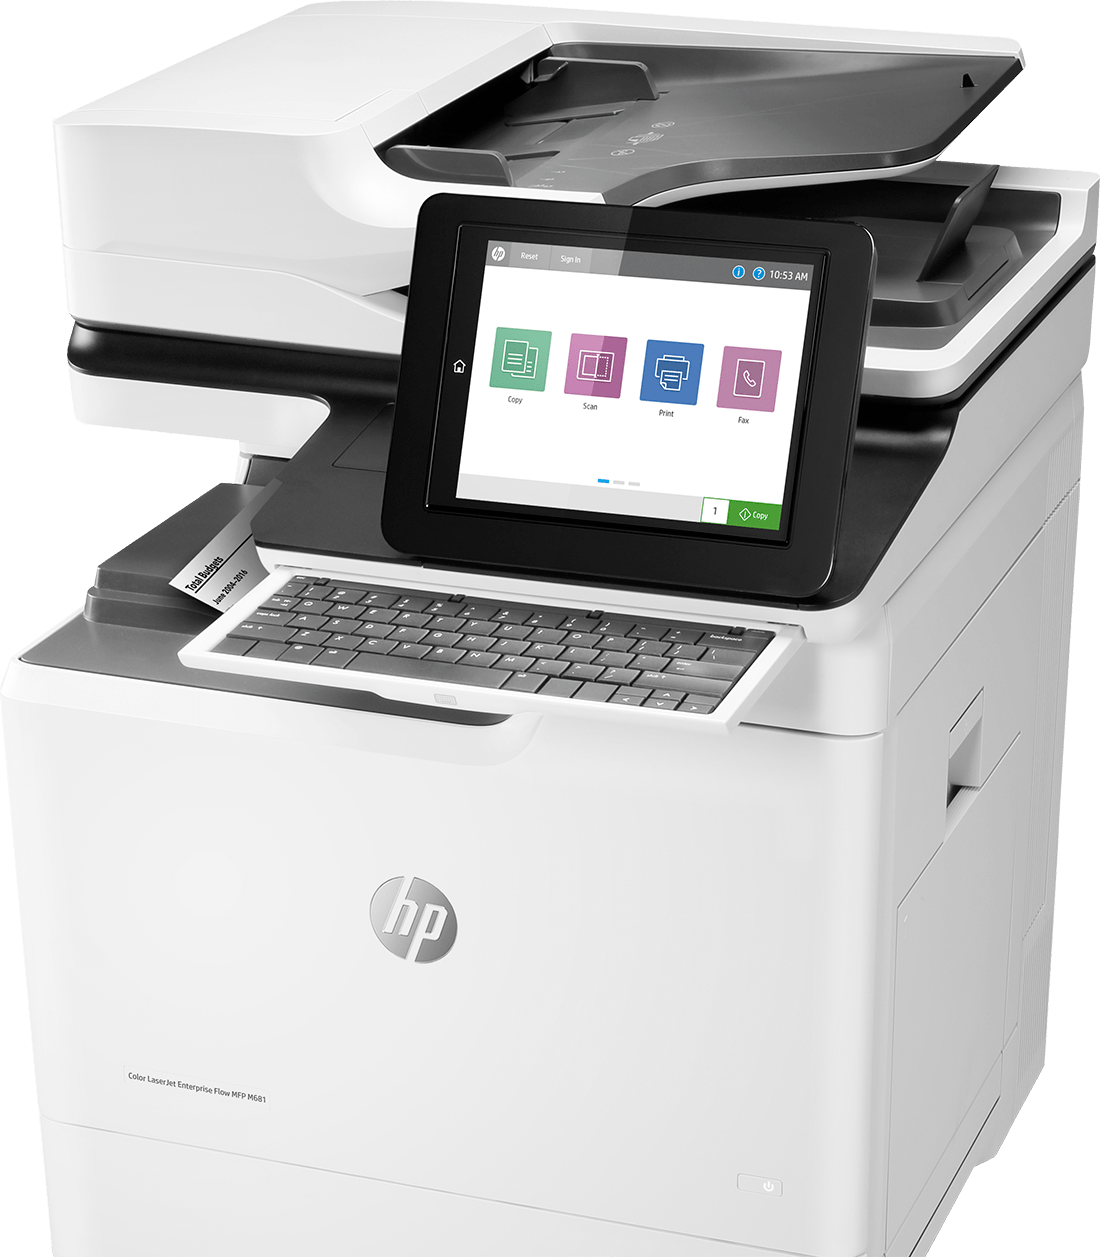 OFFICE PRINTER LEASE